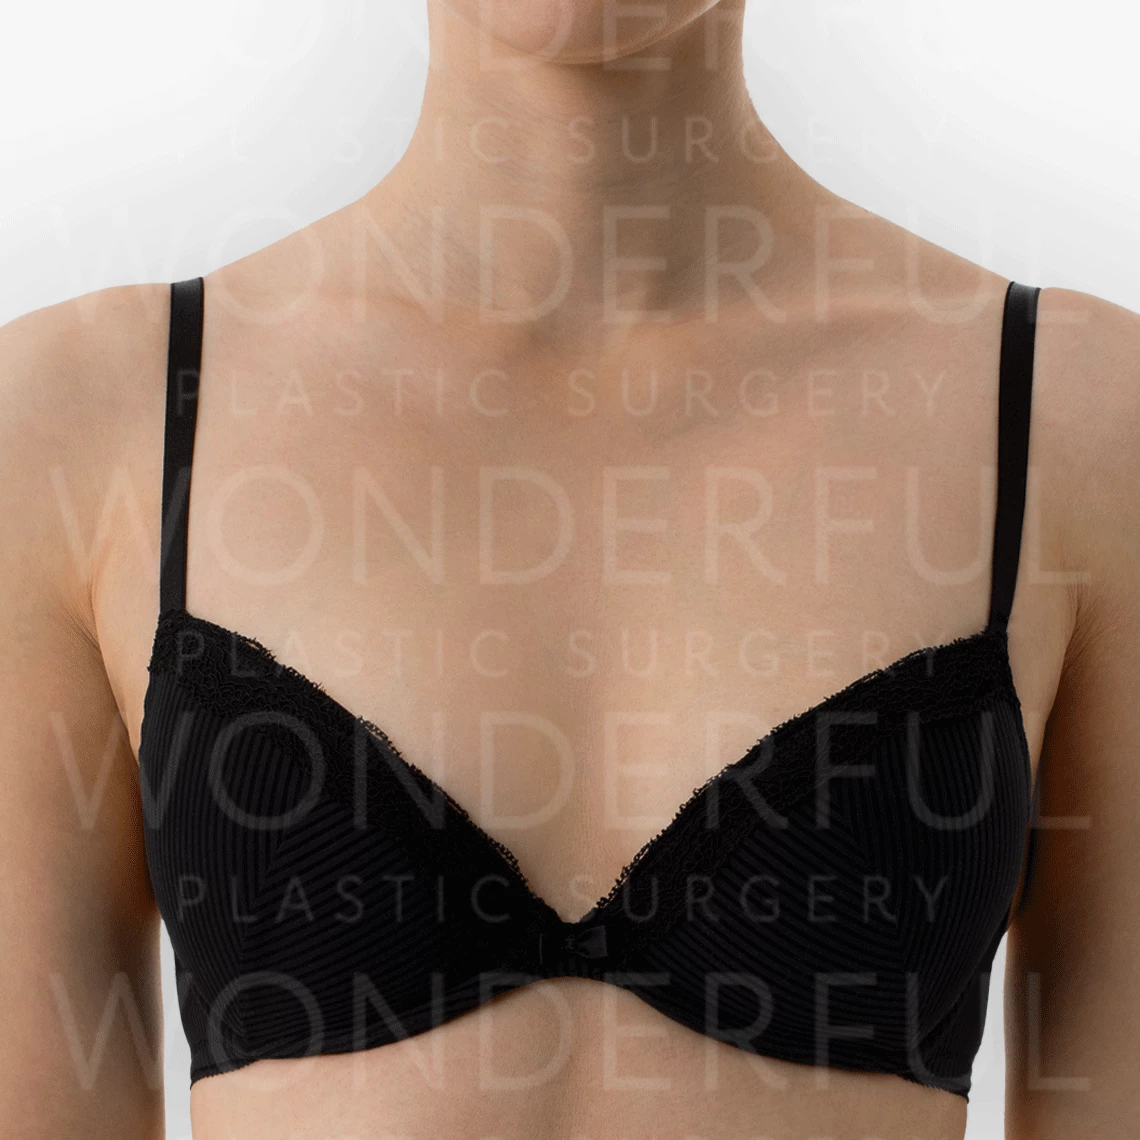 wonderful-plastic-surgery-hospital-korea-breast-augmentation-before-after-results-before-1